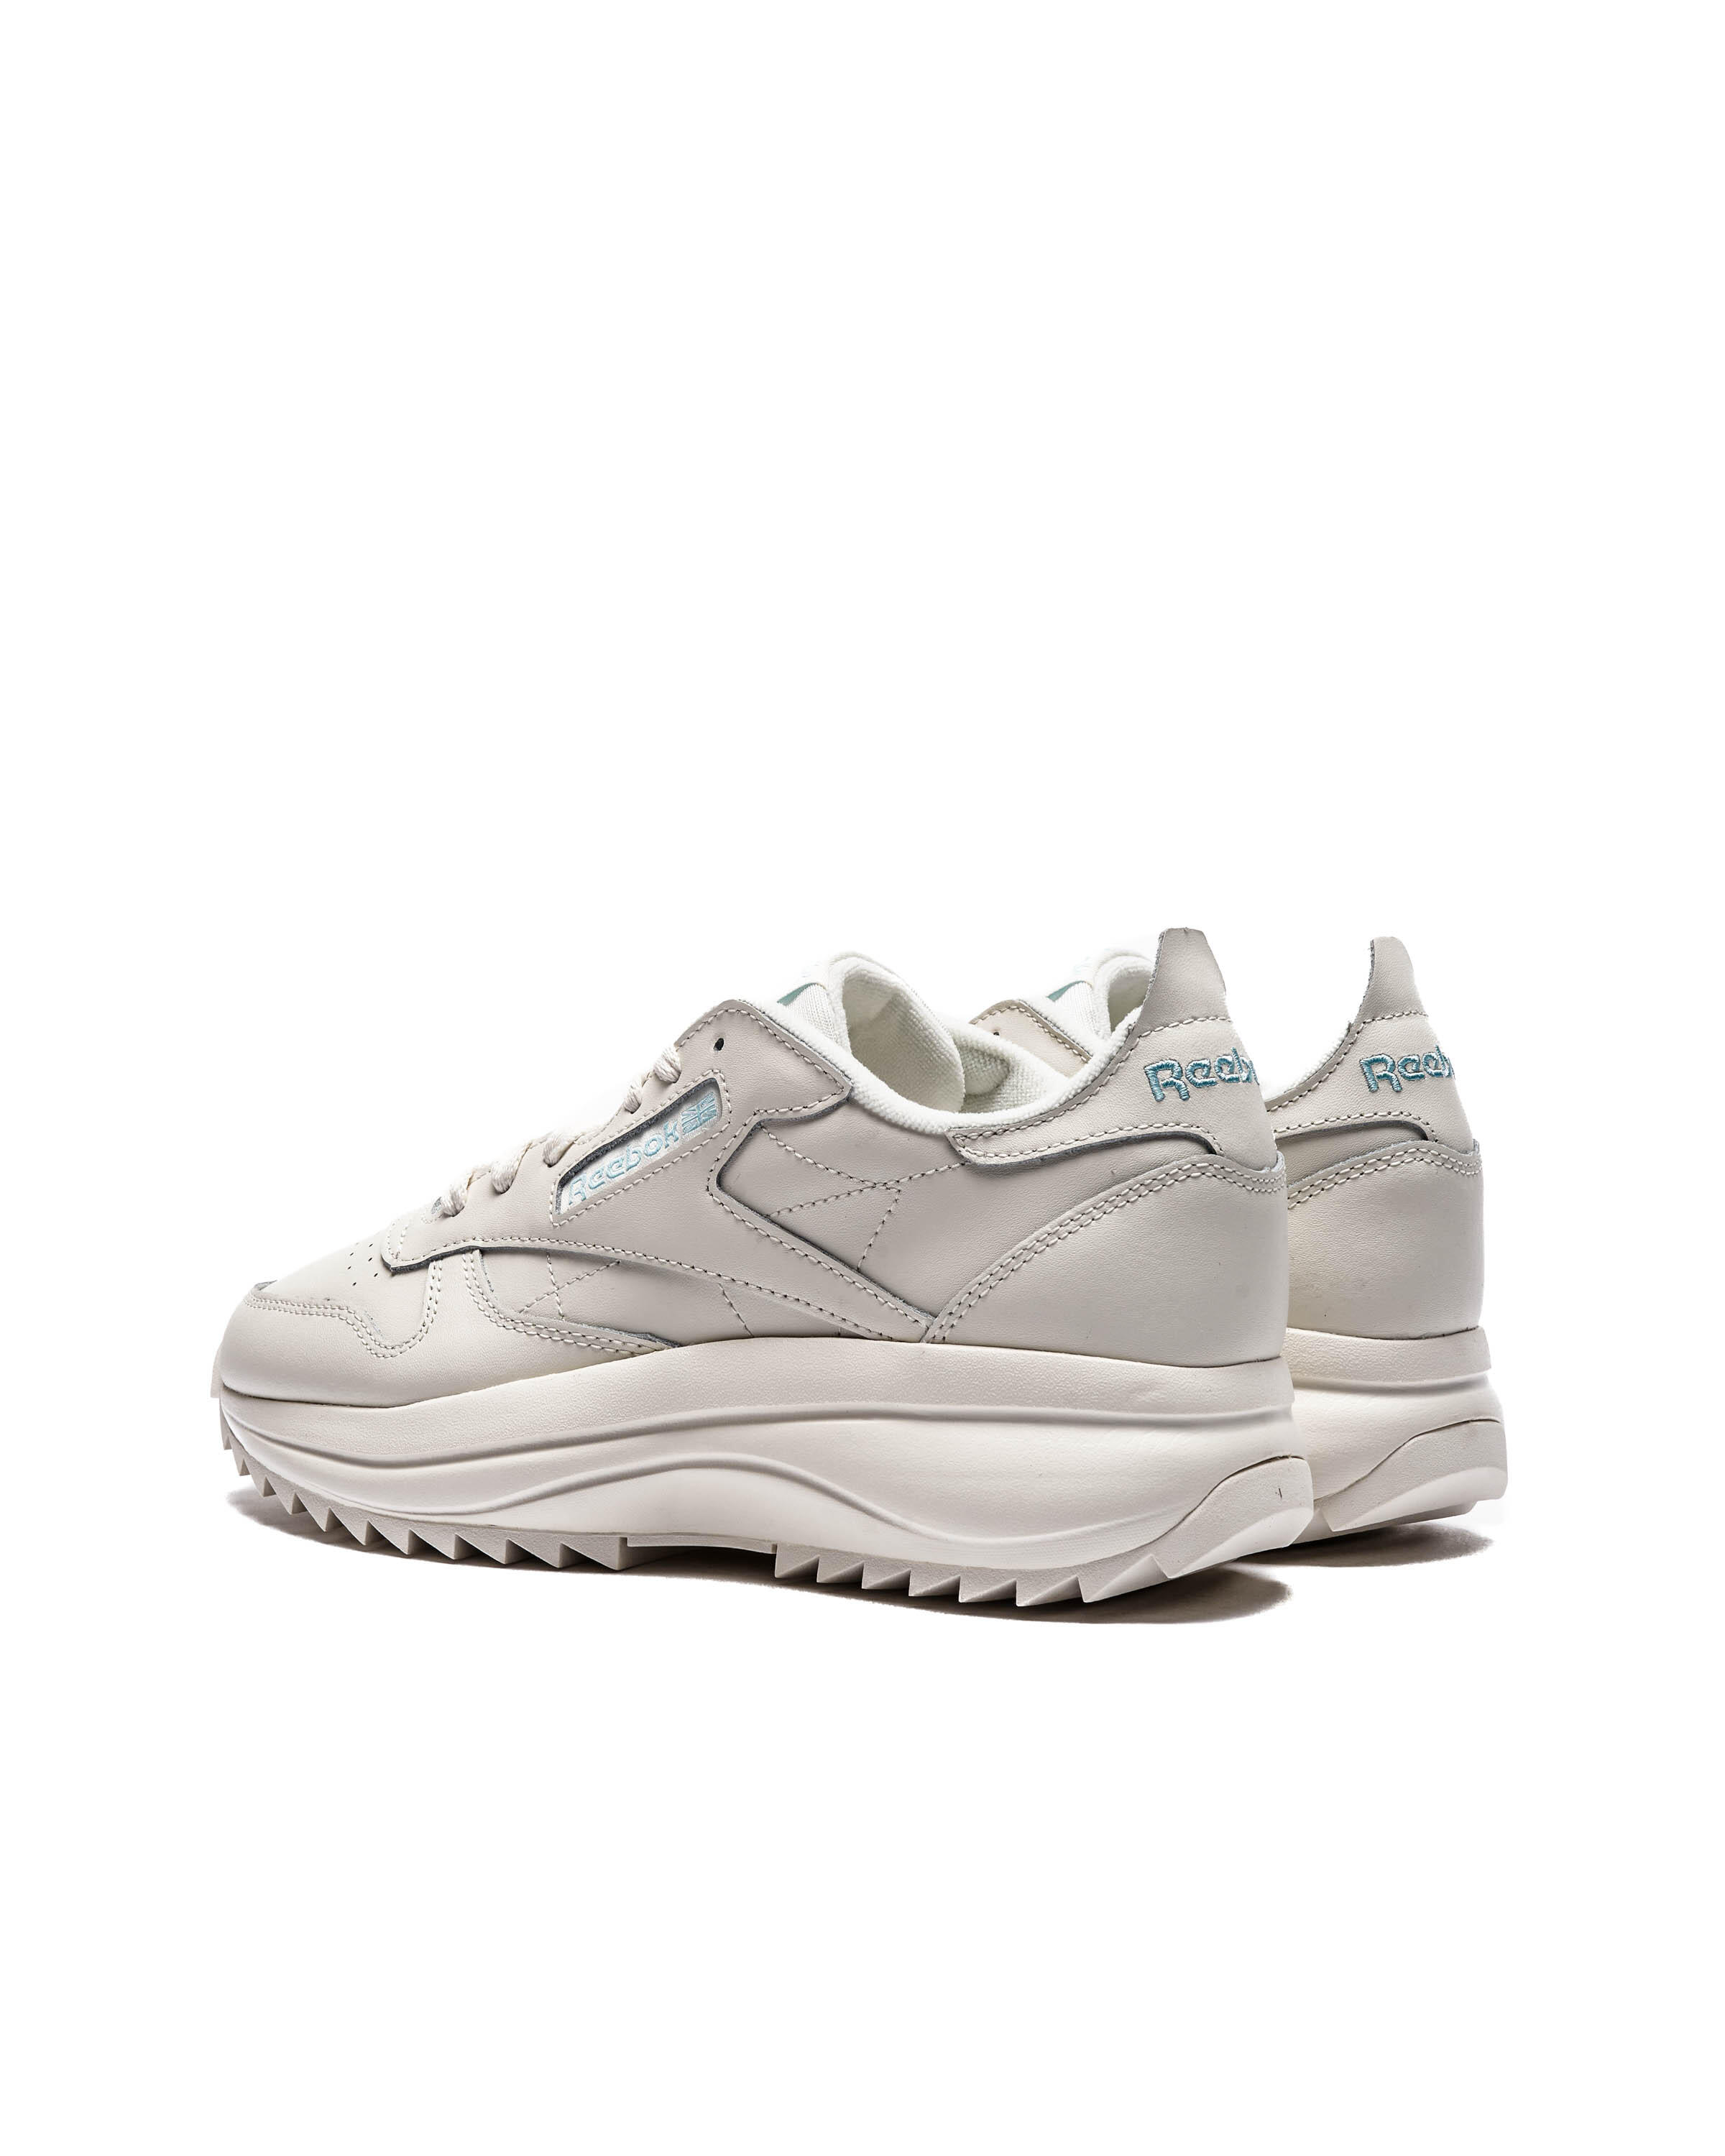 Reebok WMNS CLASSIC LEATHER SP